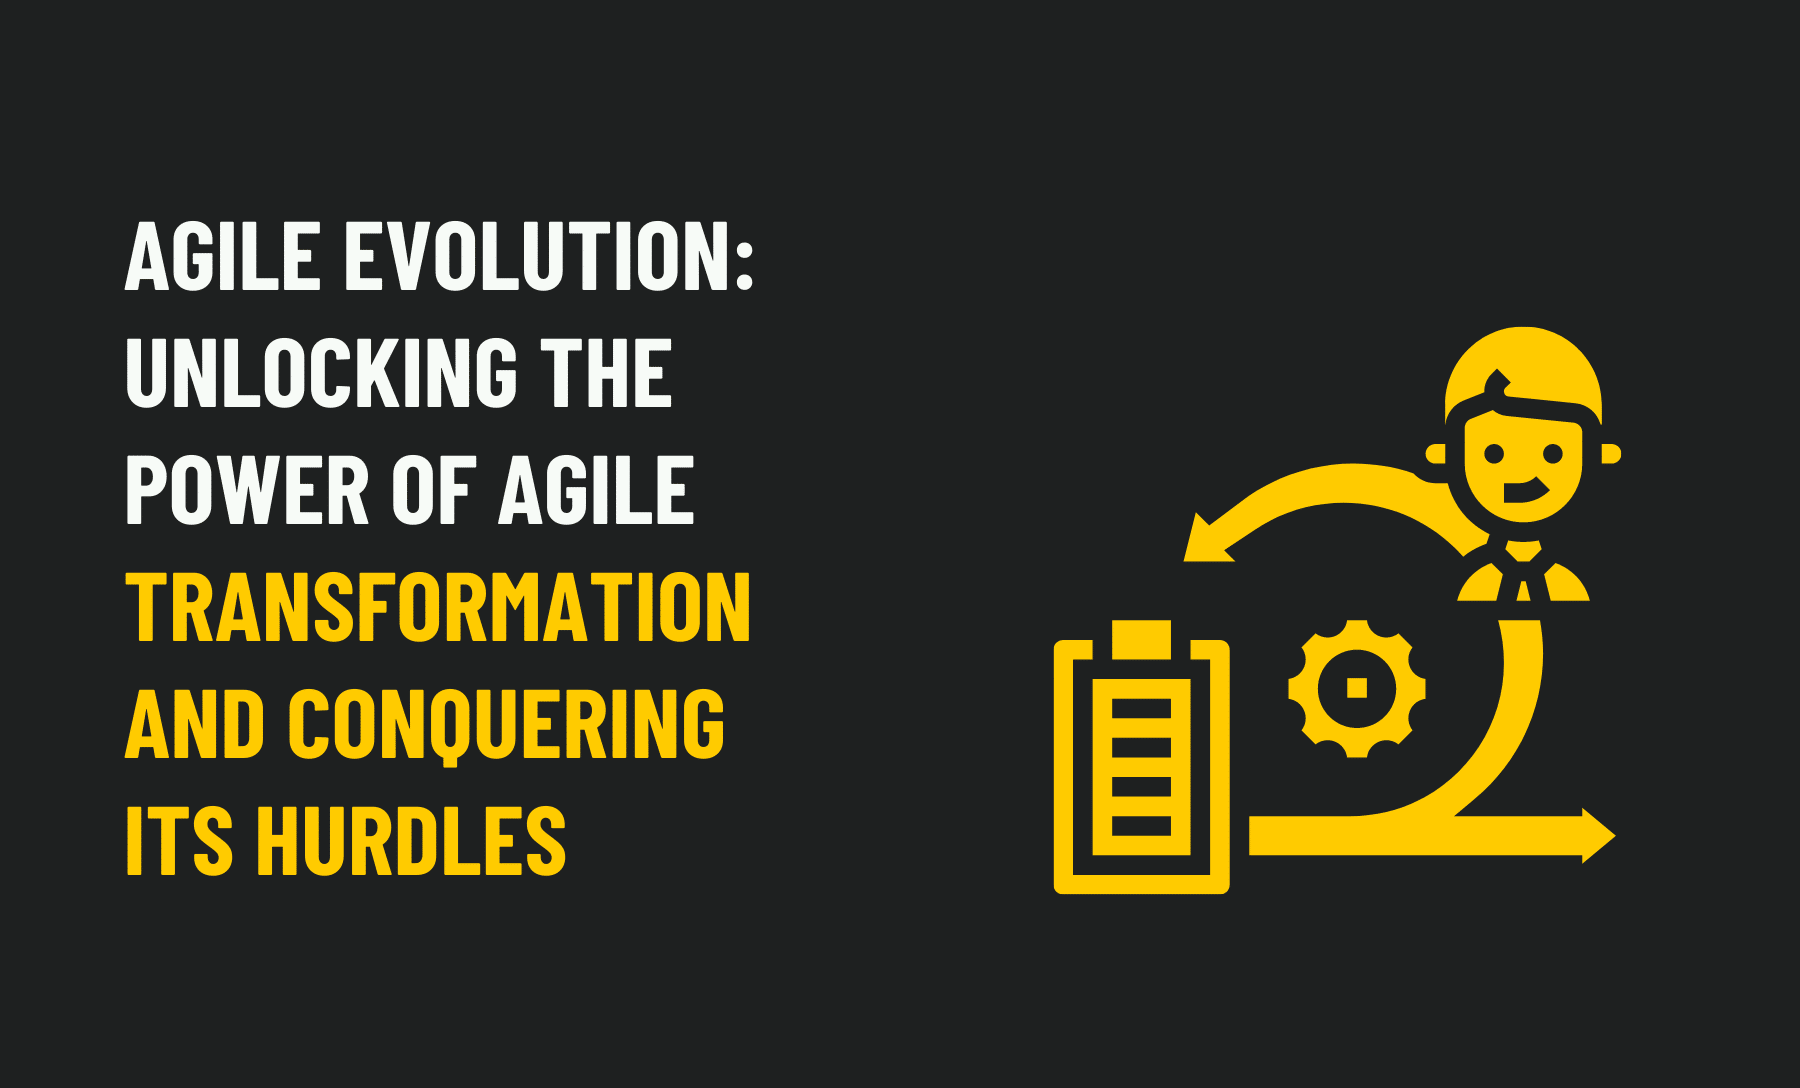 Agile Evolution: Unlocking the Power of Agile Transformation and Conquering Its Hurdles